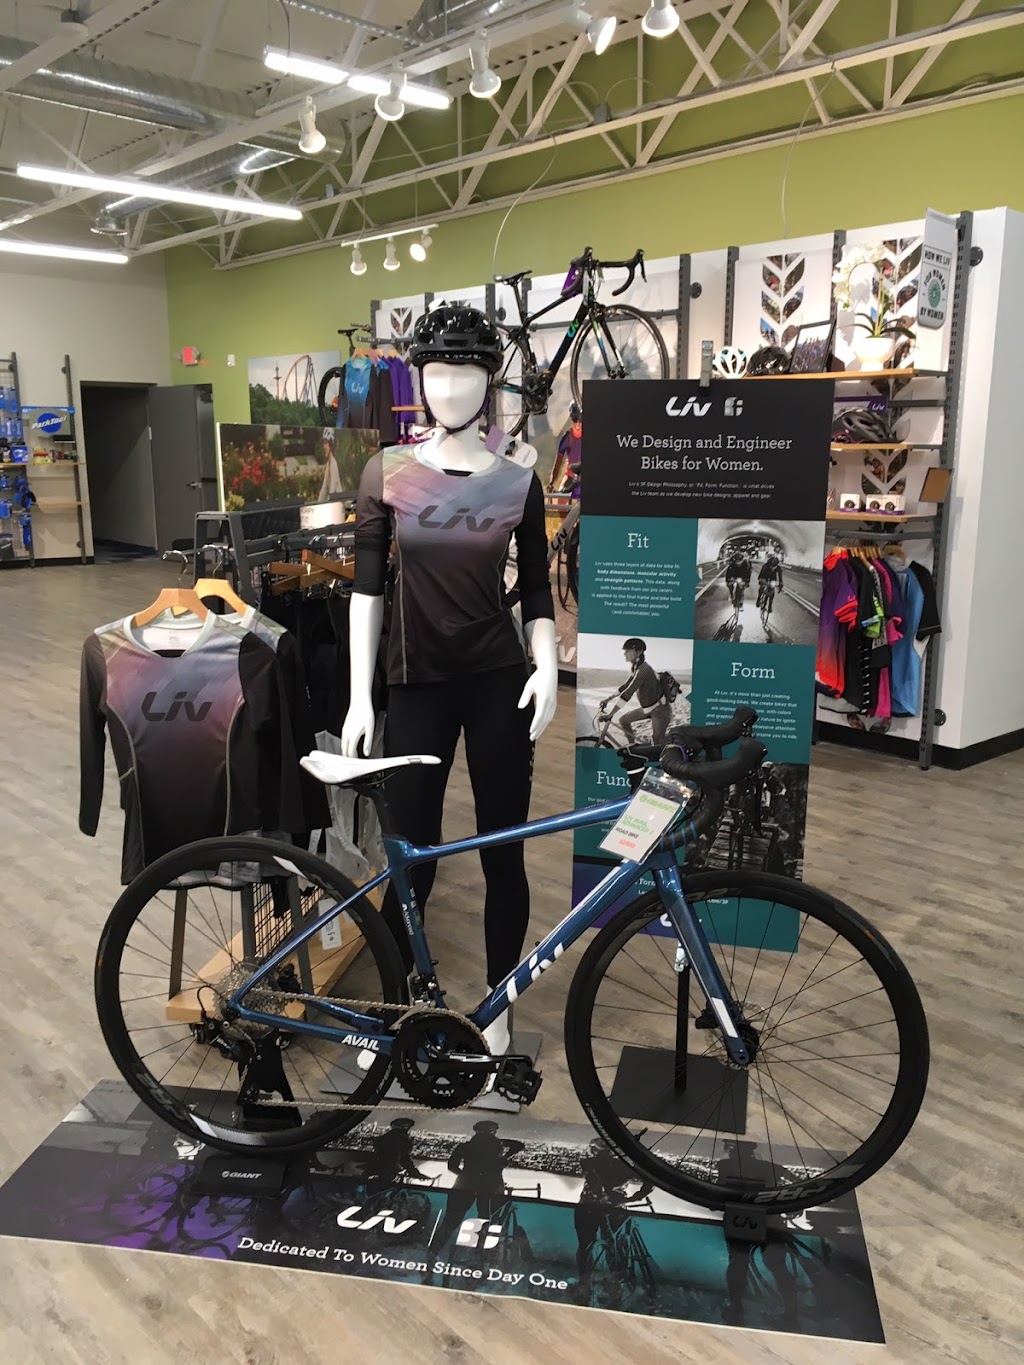 B3 Bicycles - Giant Howell | 6527 US-9, Howell Township, NJ 07731 | Phone: (732) 987-6267